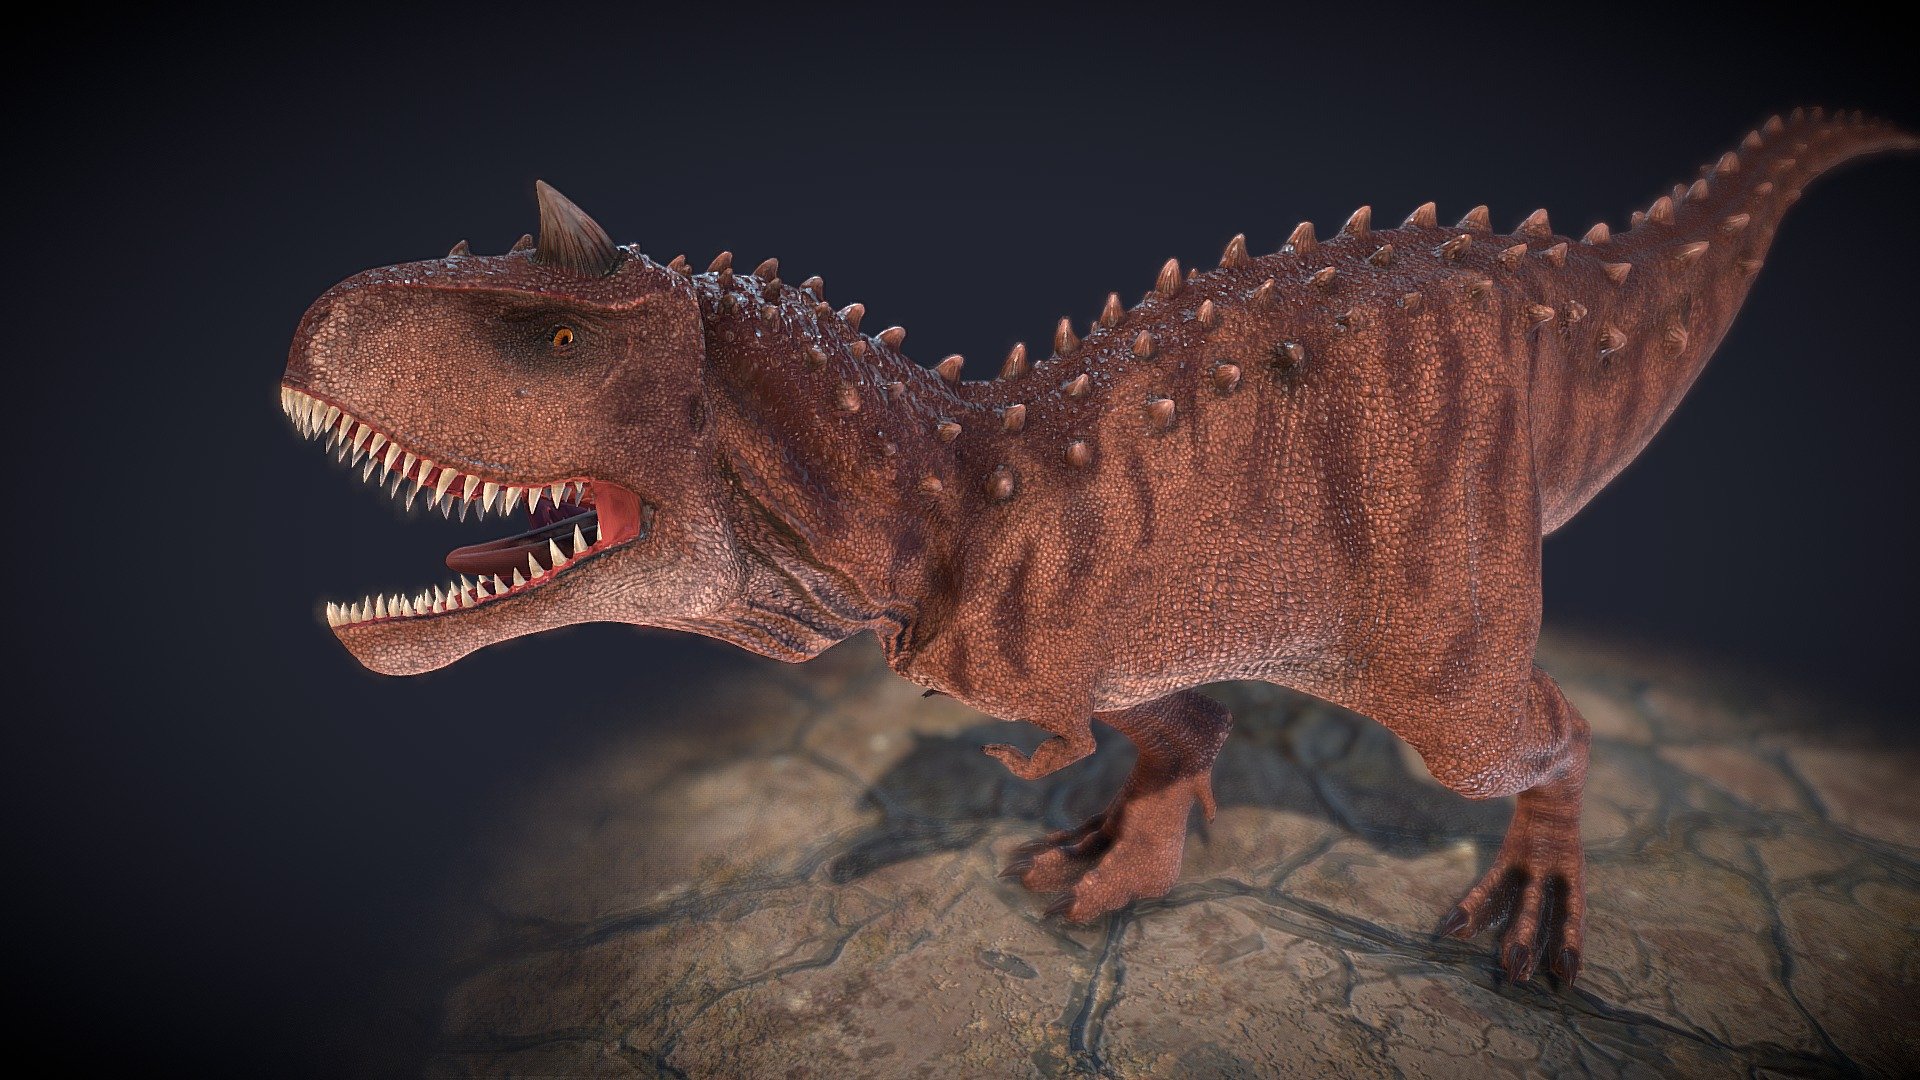 Hi dear friends!

And welcome to the final result of the July Project of my Patreon.

I really enjoyed making this more realistic Dinosaur style, because I used the new blender 2.8 with all the new features that it has.  And this new version of blender is greatest, they improve a lot the 3D performance, the visualization of the matcaps and the workflow, is more intuitive to work and smoother. 

Definitely is a great update of this awesome software. 

Hope you enjoy the result of this project,  you can find the entire workflow videos in my Patreon page or in my Gumroad Shop!!

Please let me know any question I will so glad to help you.

Take Care! - Carnotaurus July Project of Patreon - 3D model by Magnaomega 3d model